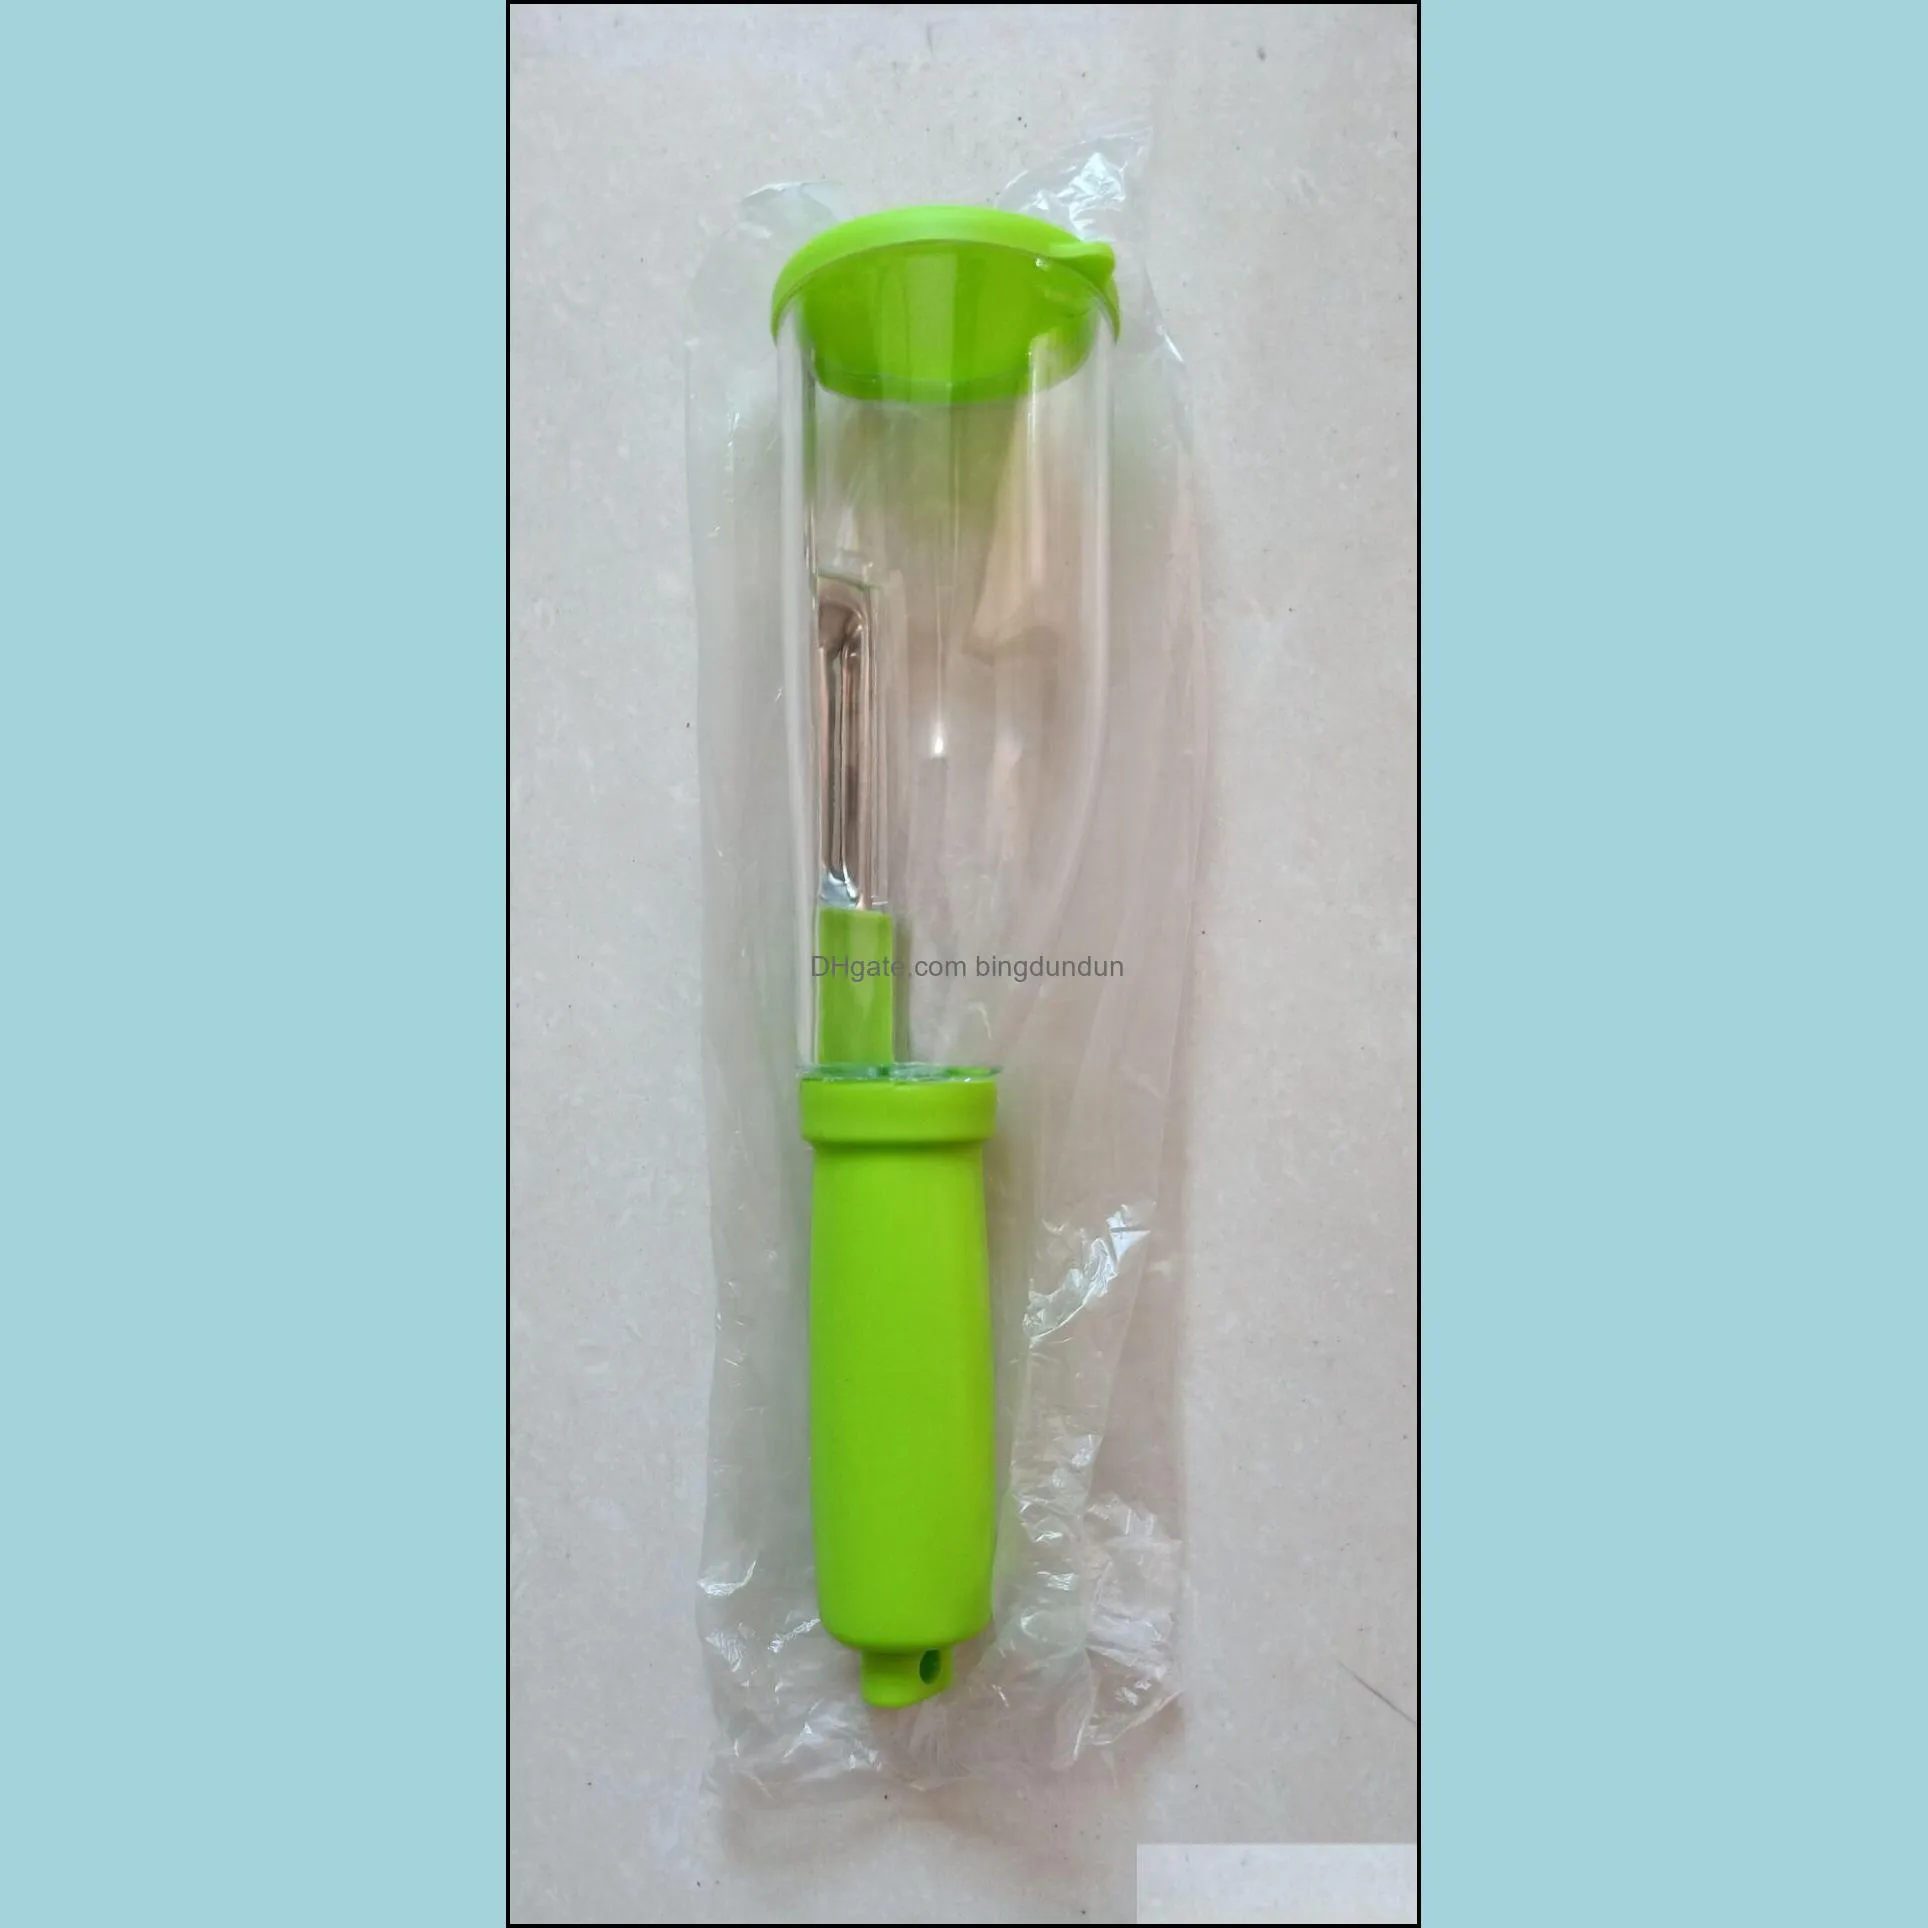 stainless steel multifunctional storage peeler with a container for potato cucumber carrot fruit vegetable peeler kitchen tool